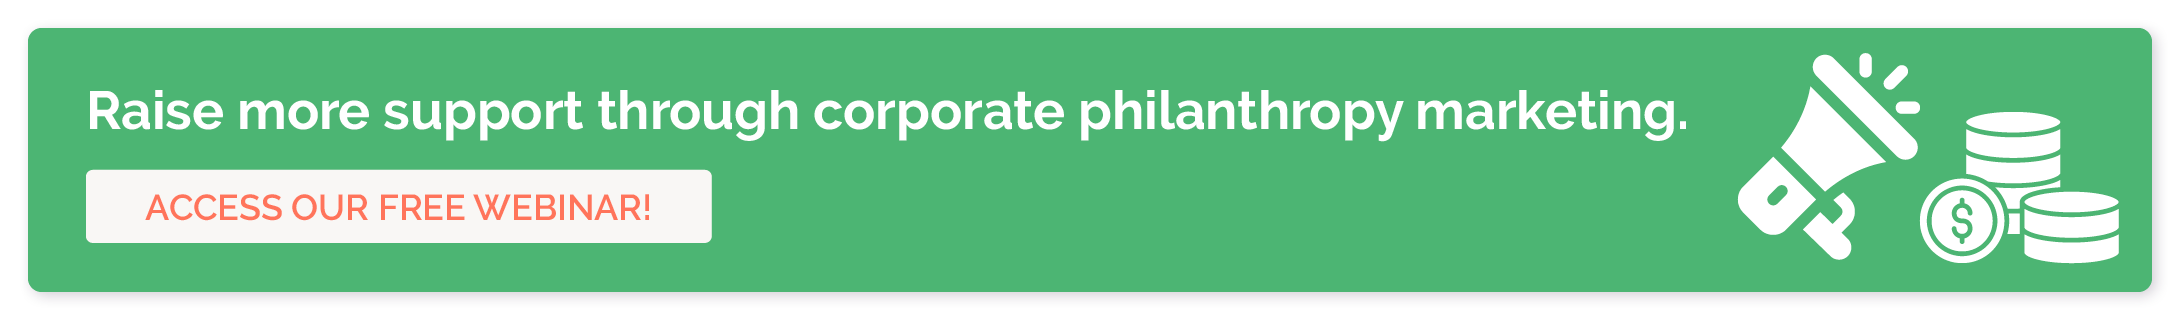 Watch our free webinar to learn how your nonprofit can boost its marketing efforts and raise more from corporate philanthropy.